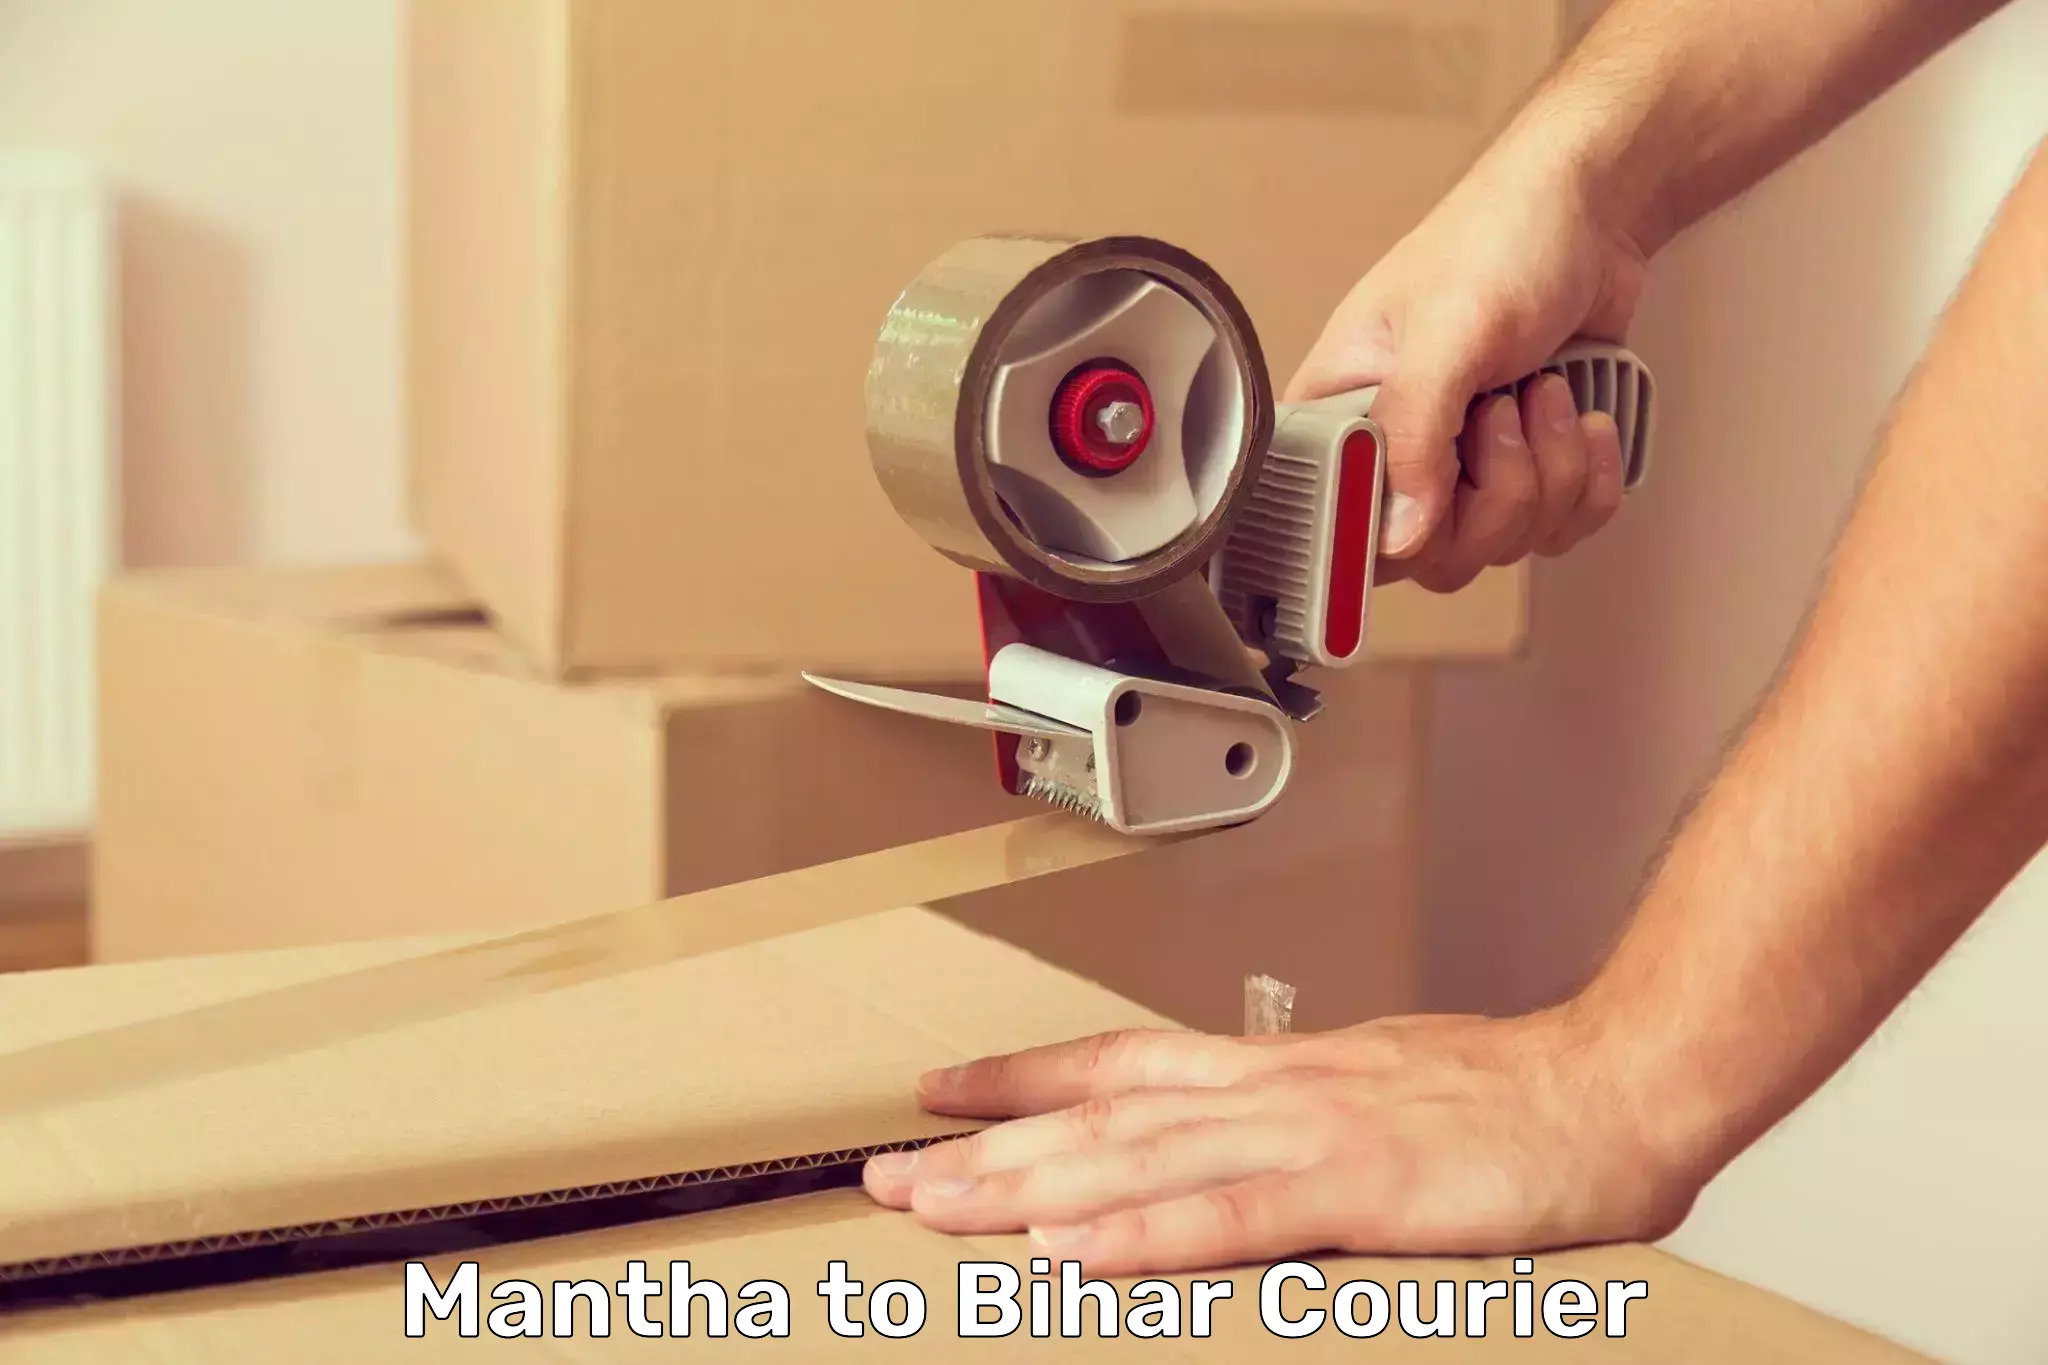 Multi-national courier services Mantha to Bihar